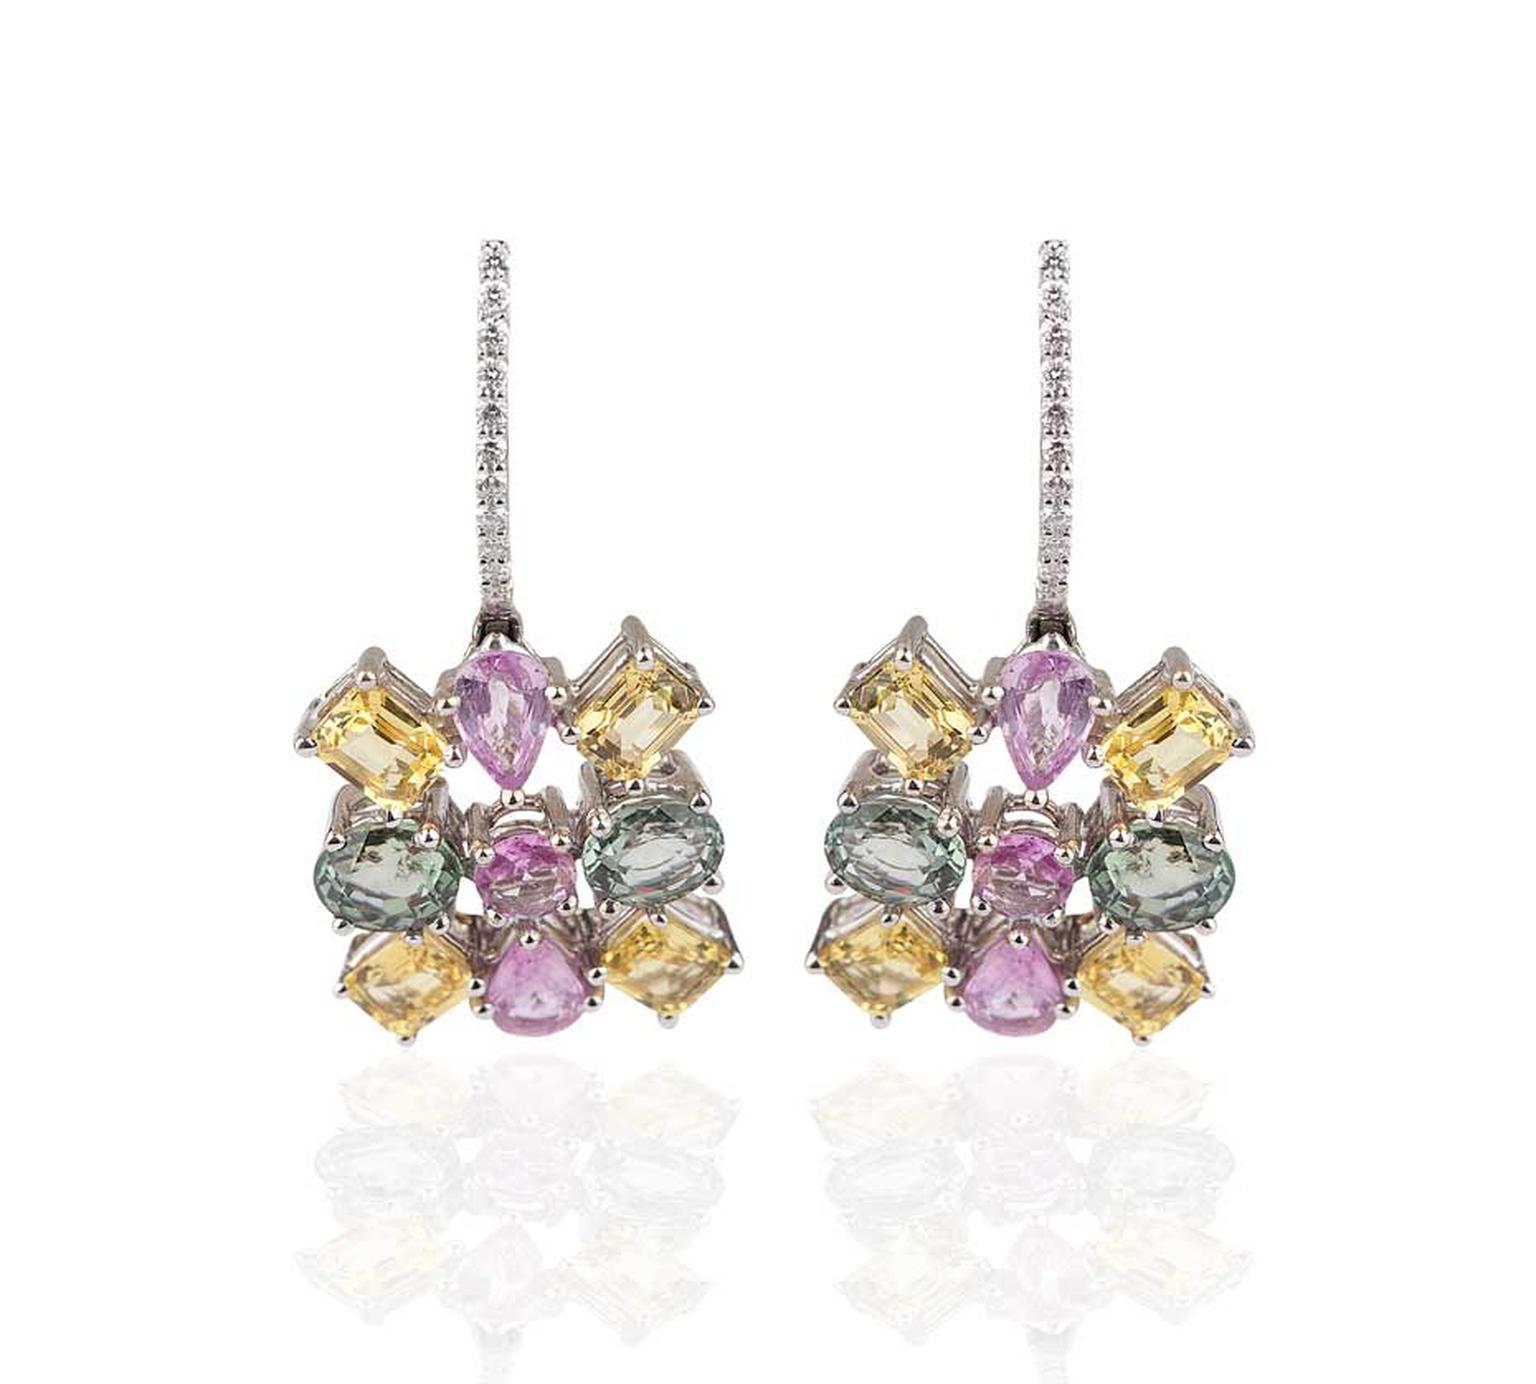 Mirari white gold earrings with multi-coloured sapphires